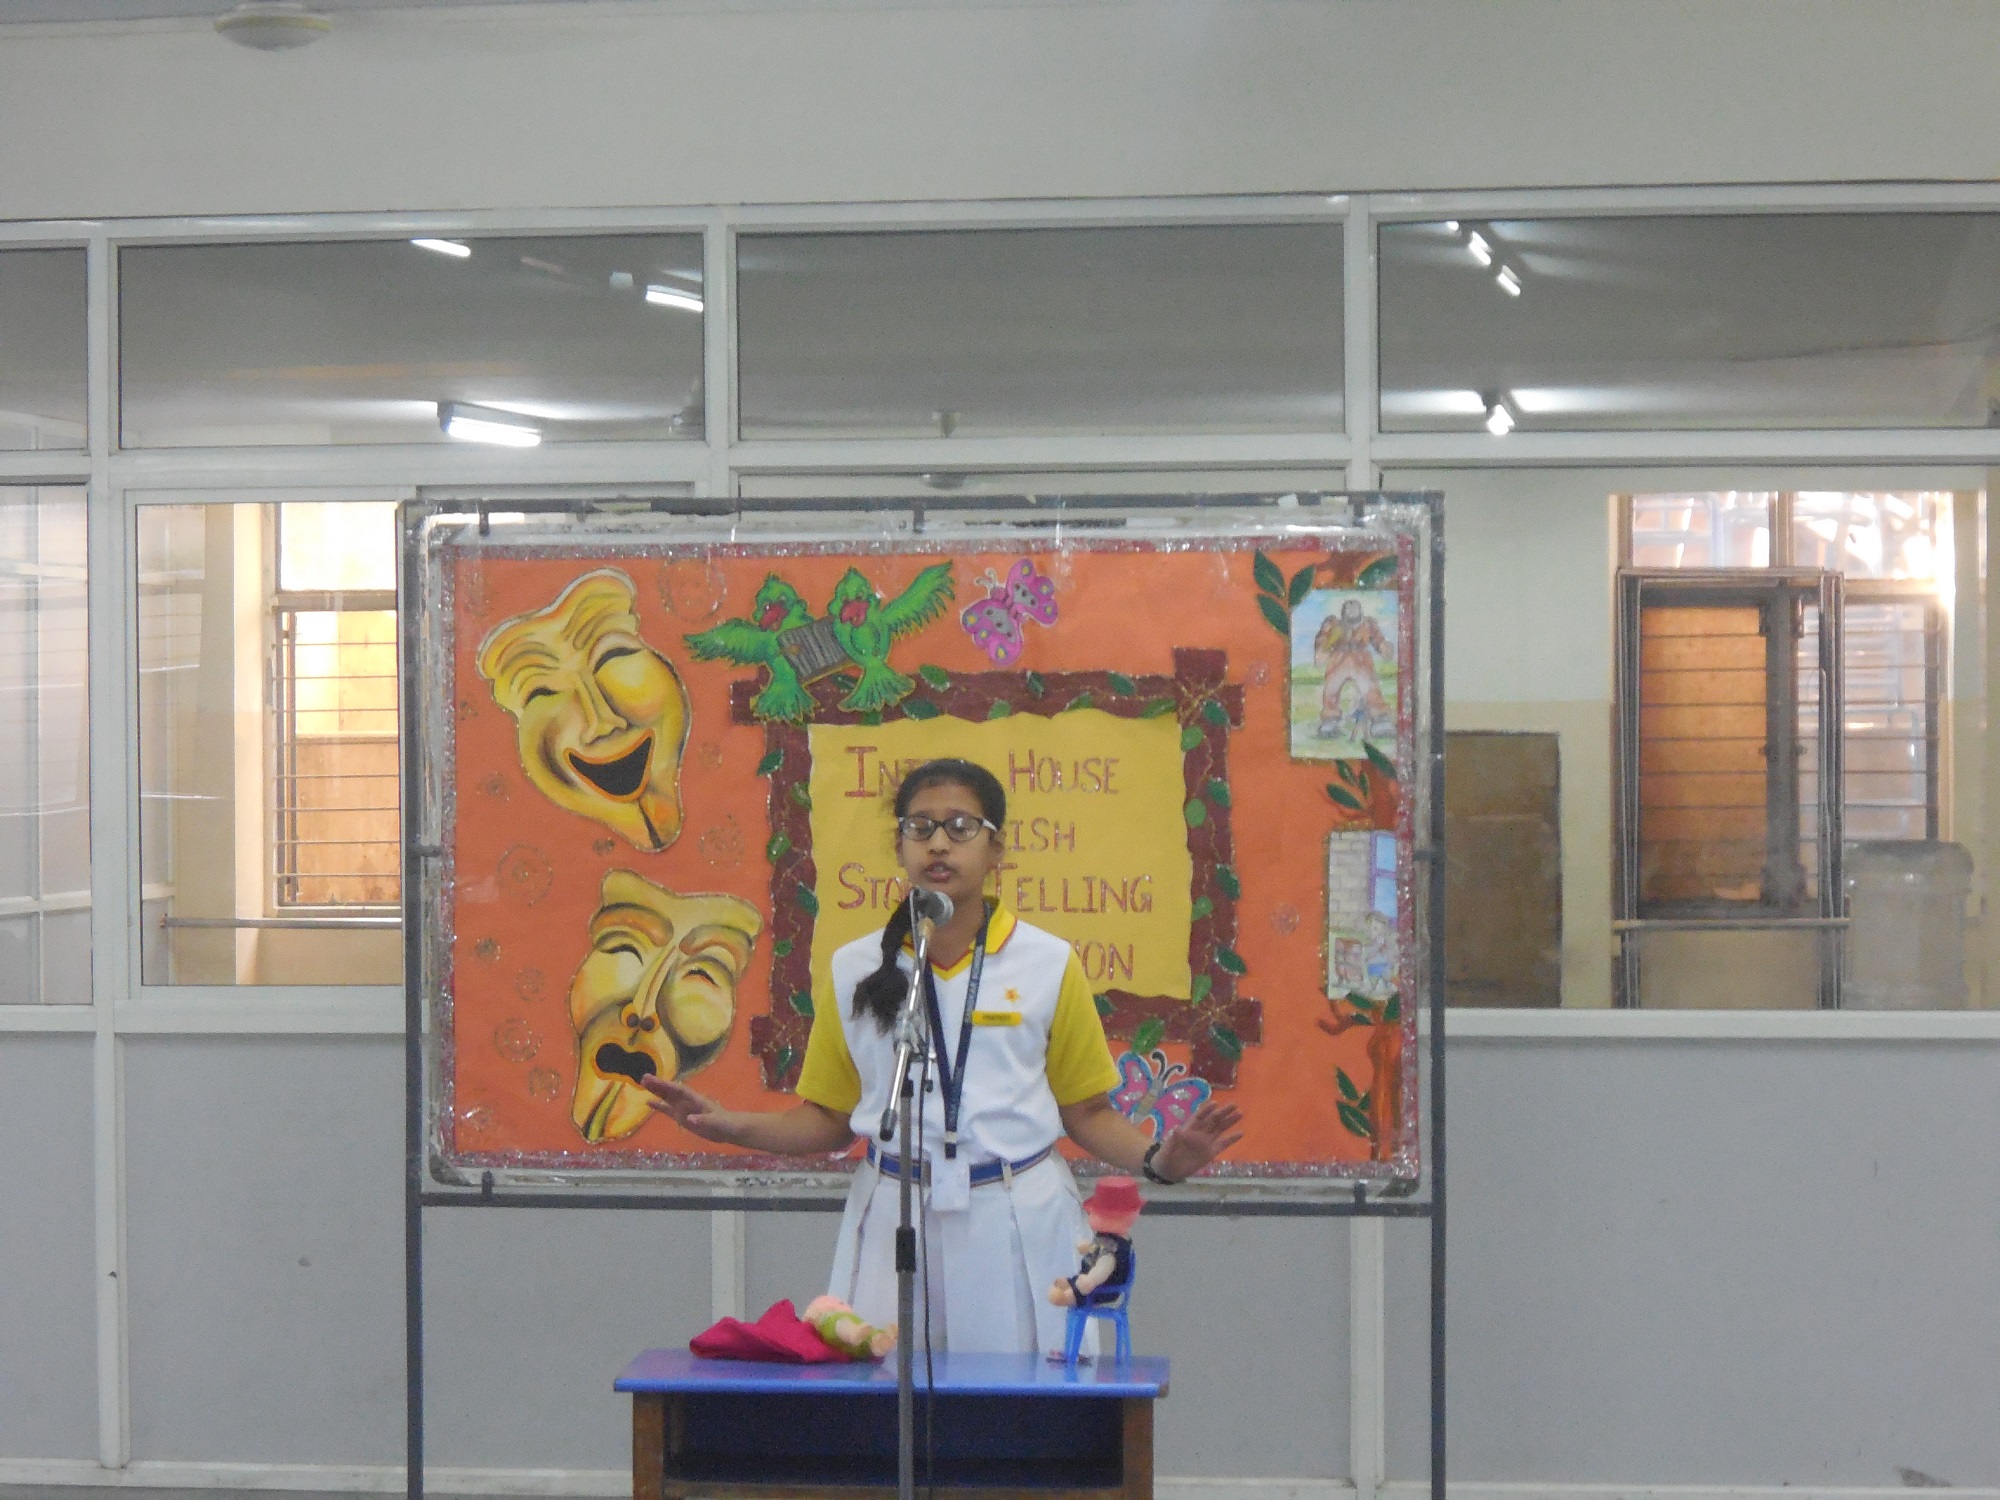 Inter House Story Telling Competition 